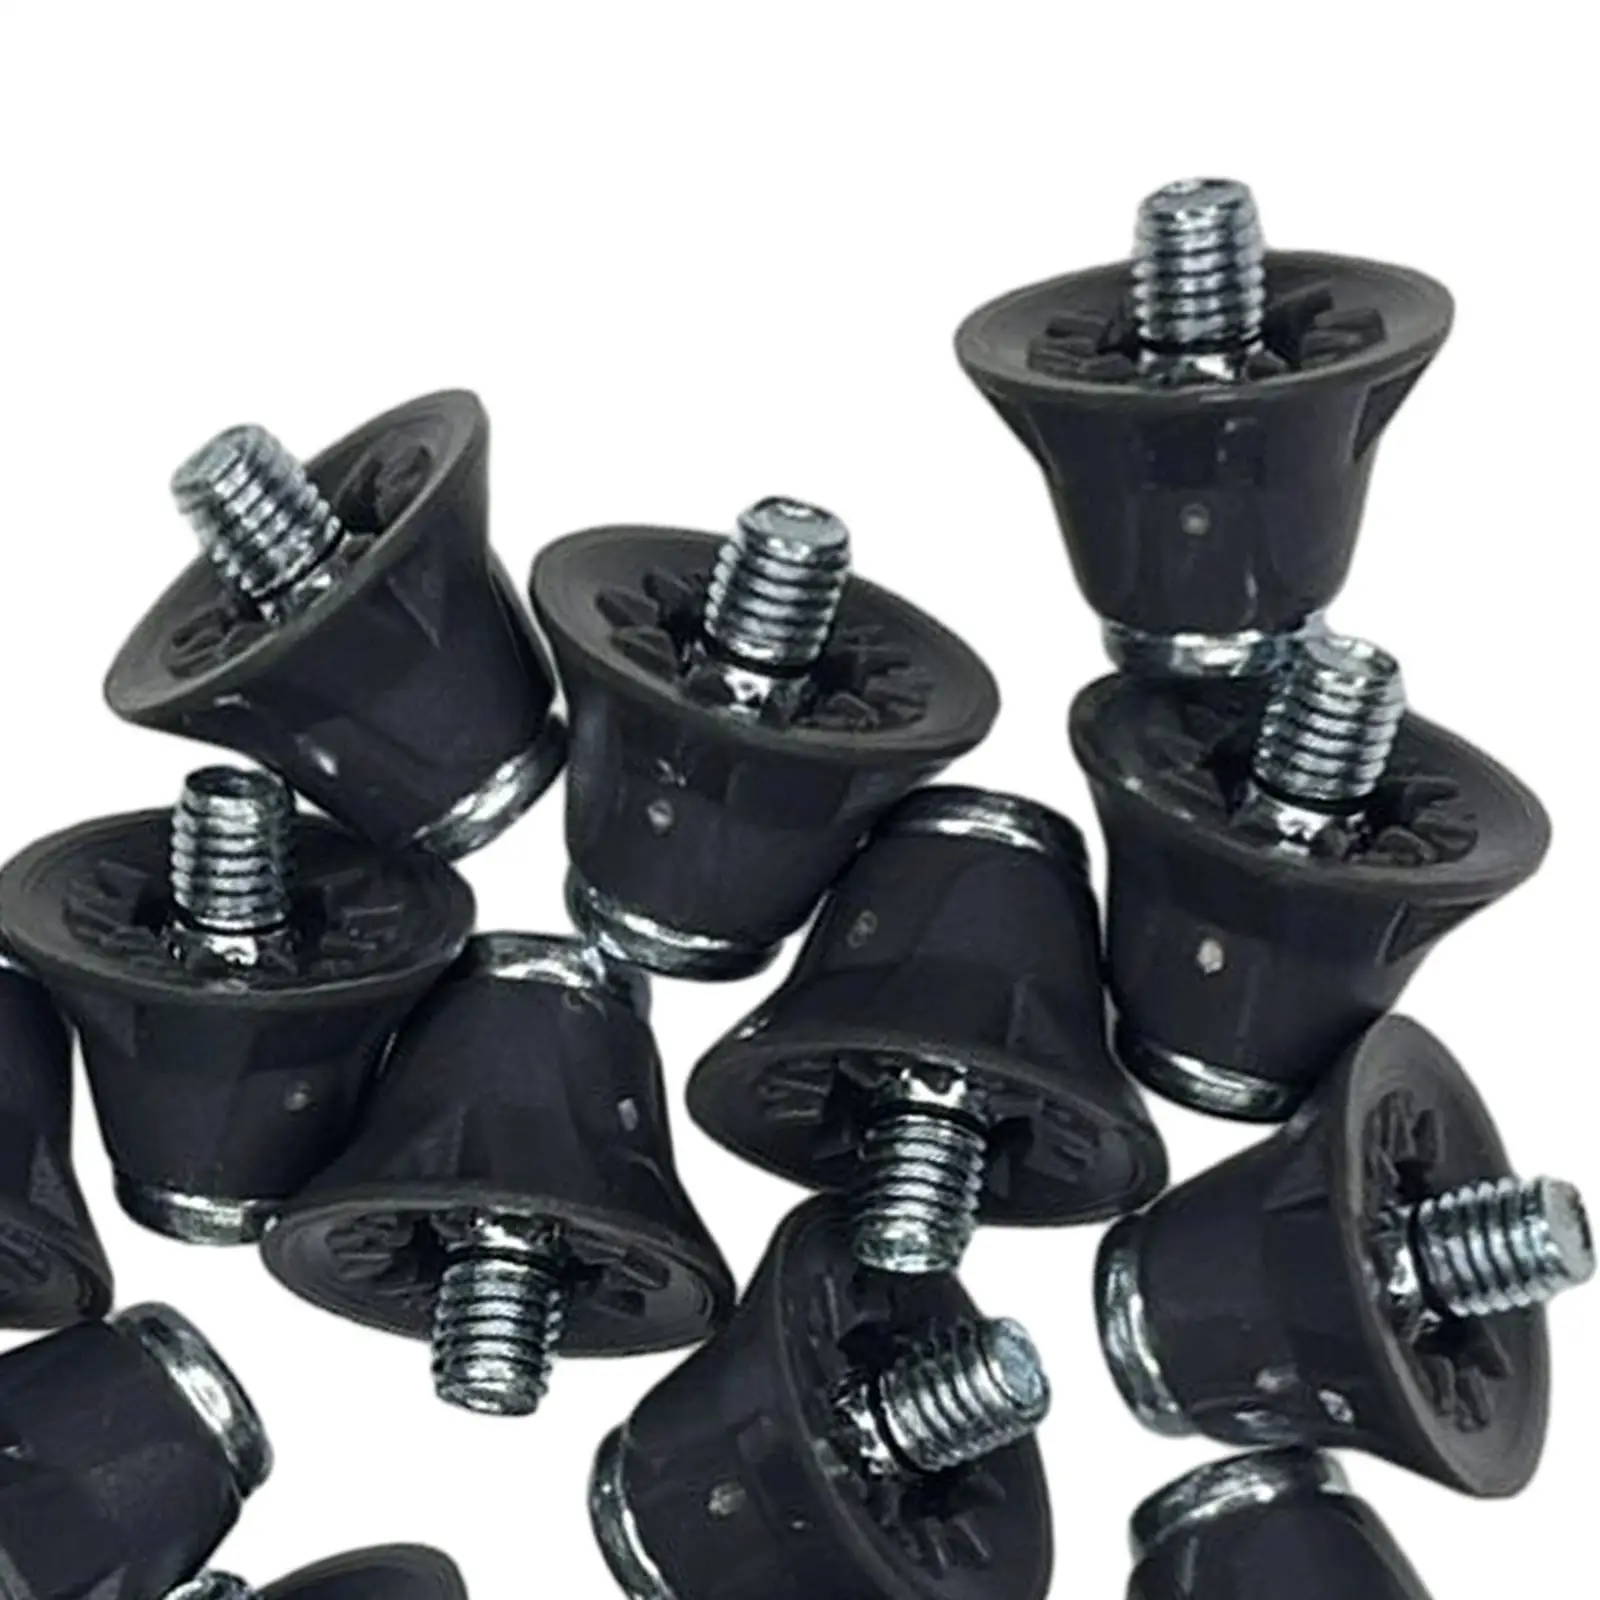 14 Pieces Track Shoes Accessories Soccer Shoe Spikes M5 Turf Firm Ground Replacement Spikes for Athletic Sneakers